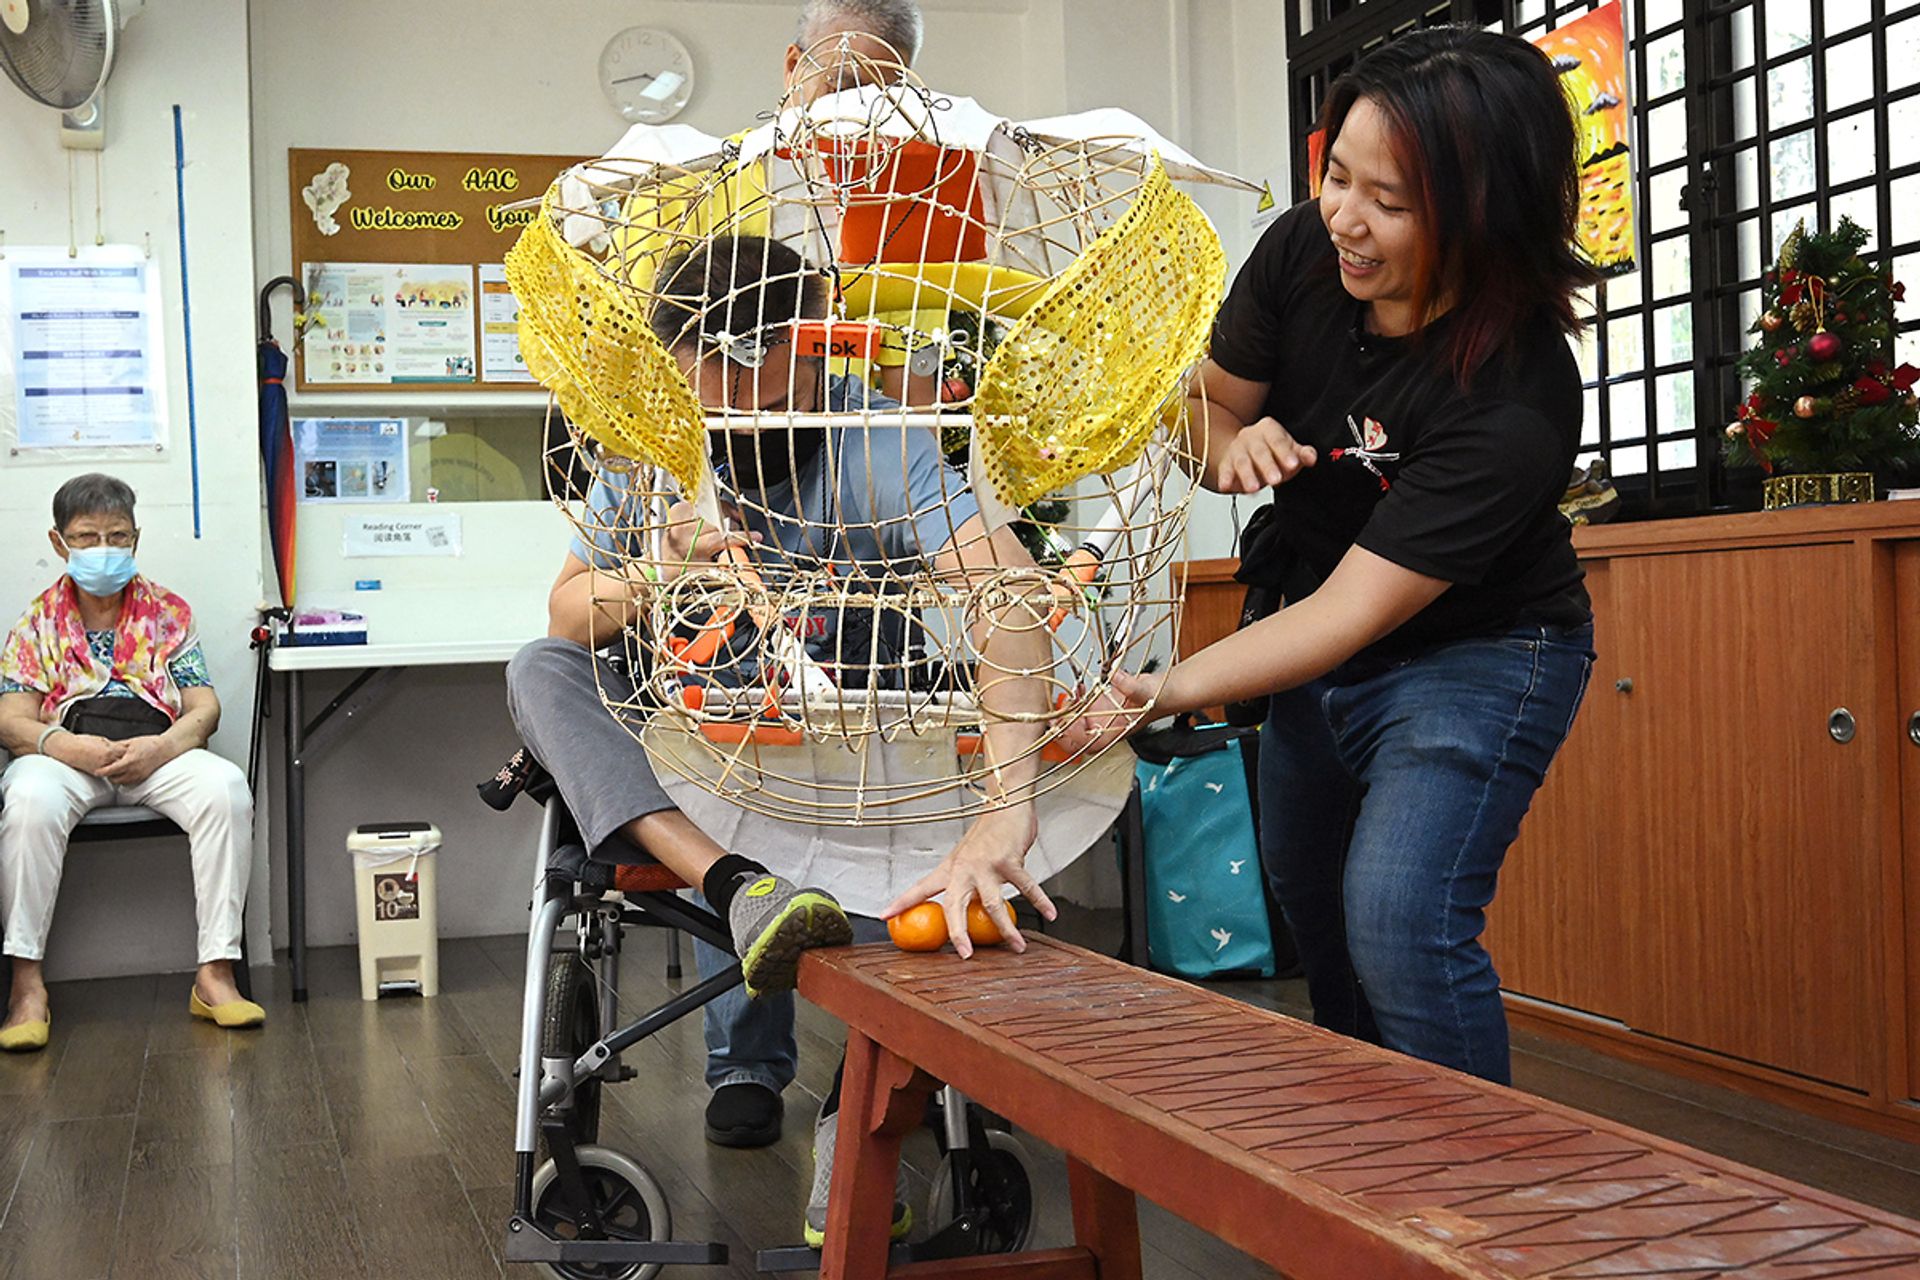 Ms Lynn Wong guiding a senior in executing the "eating the green" lion dance movement.